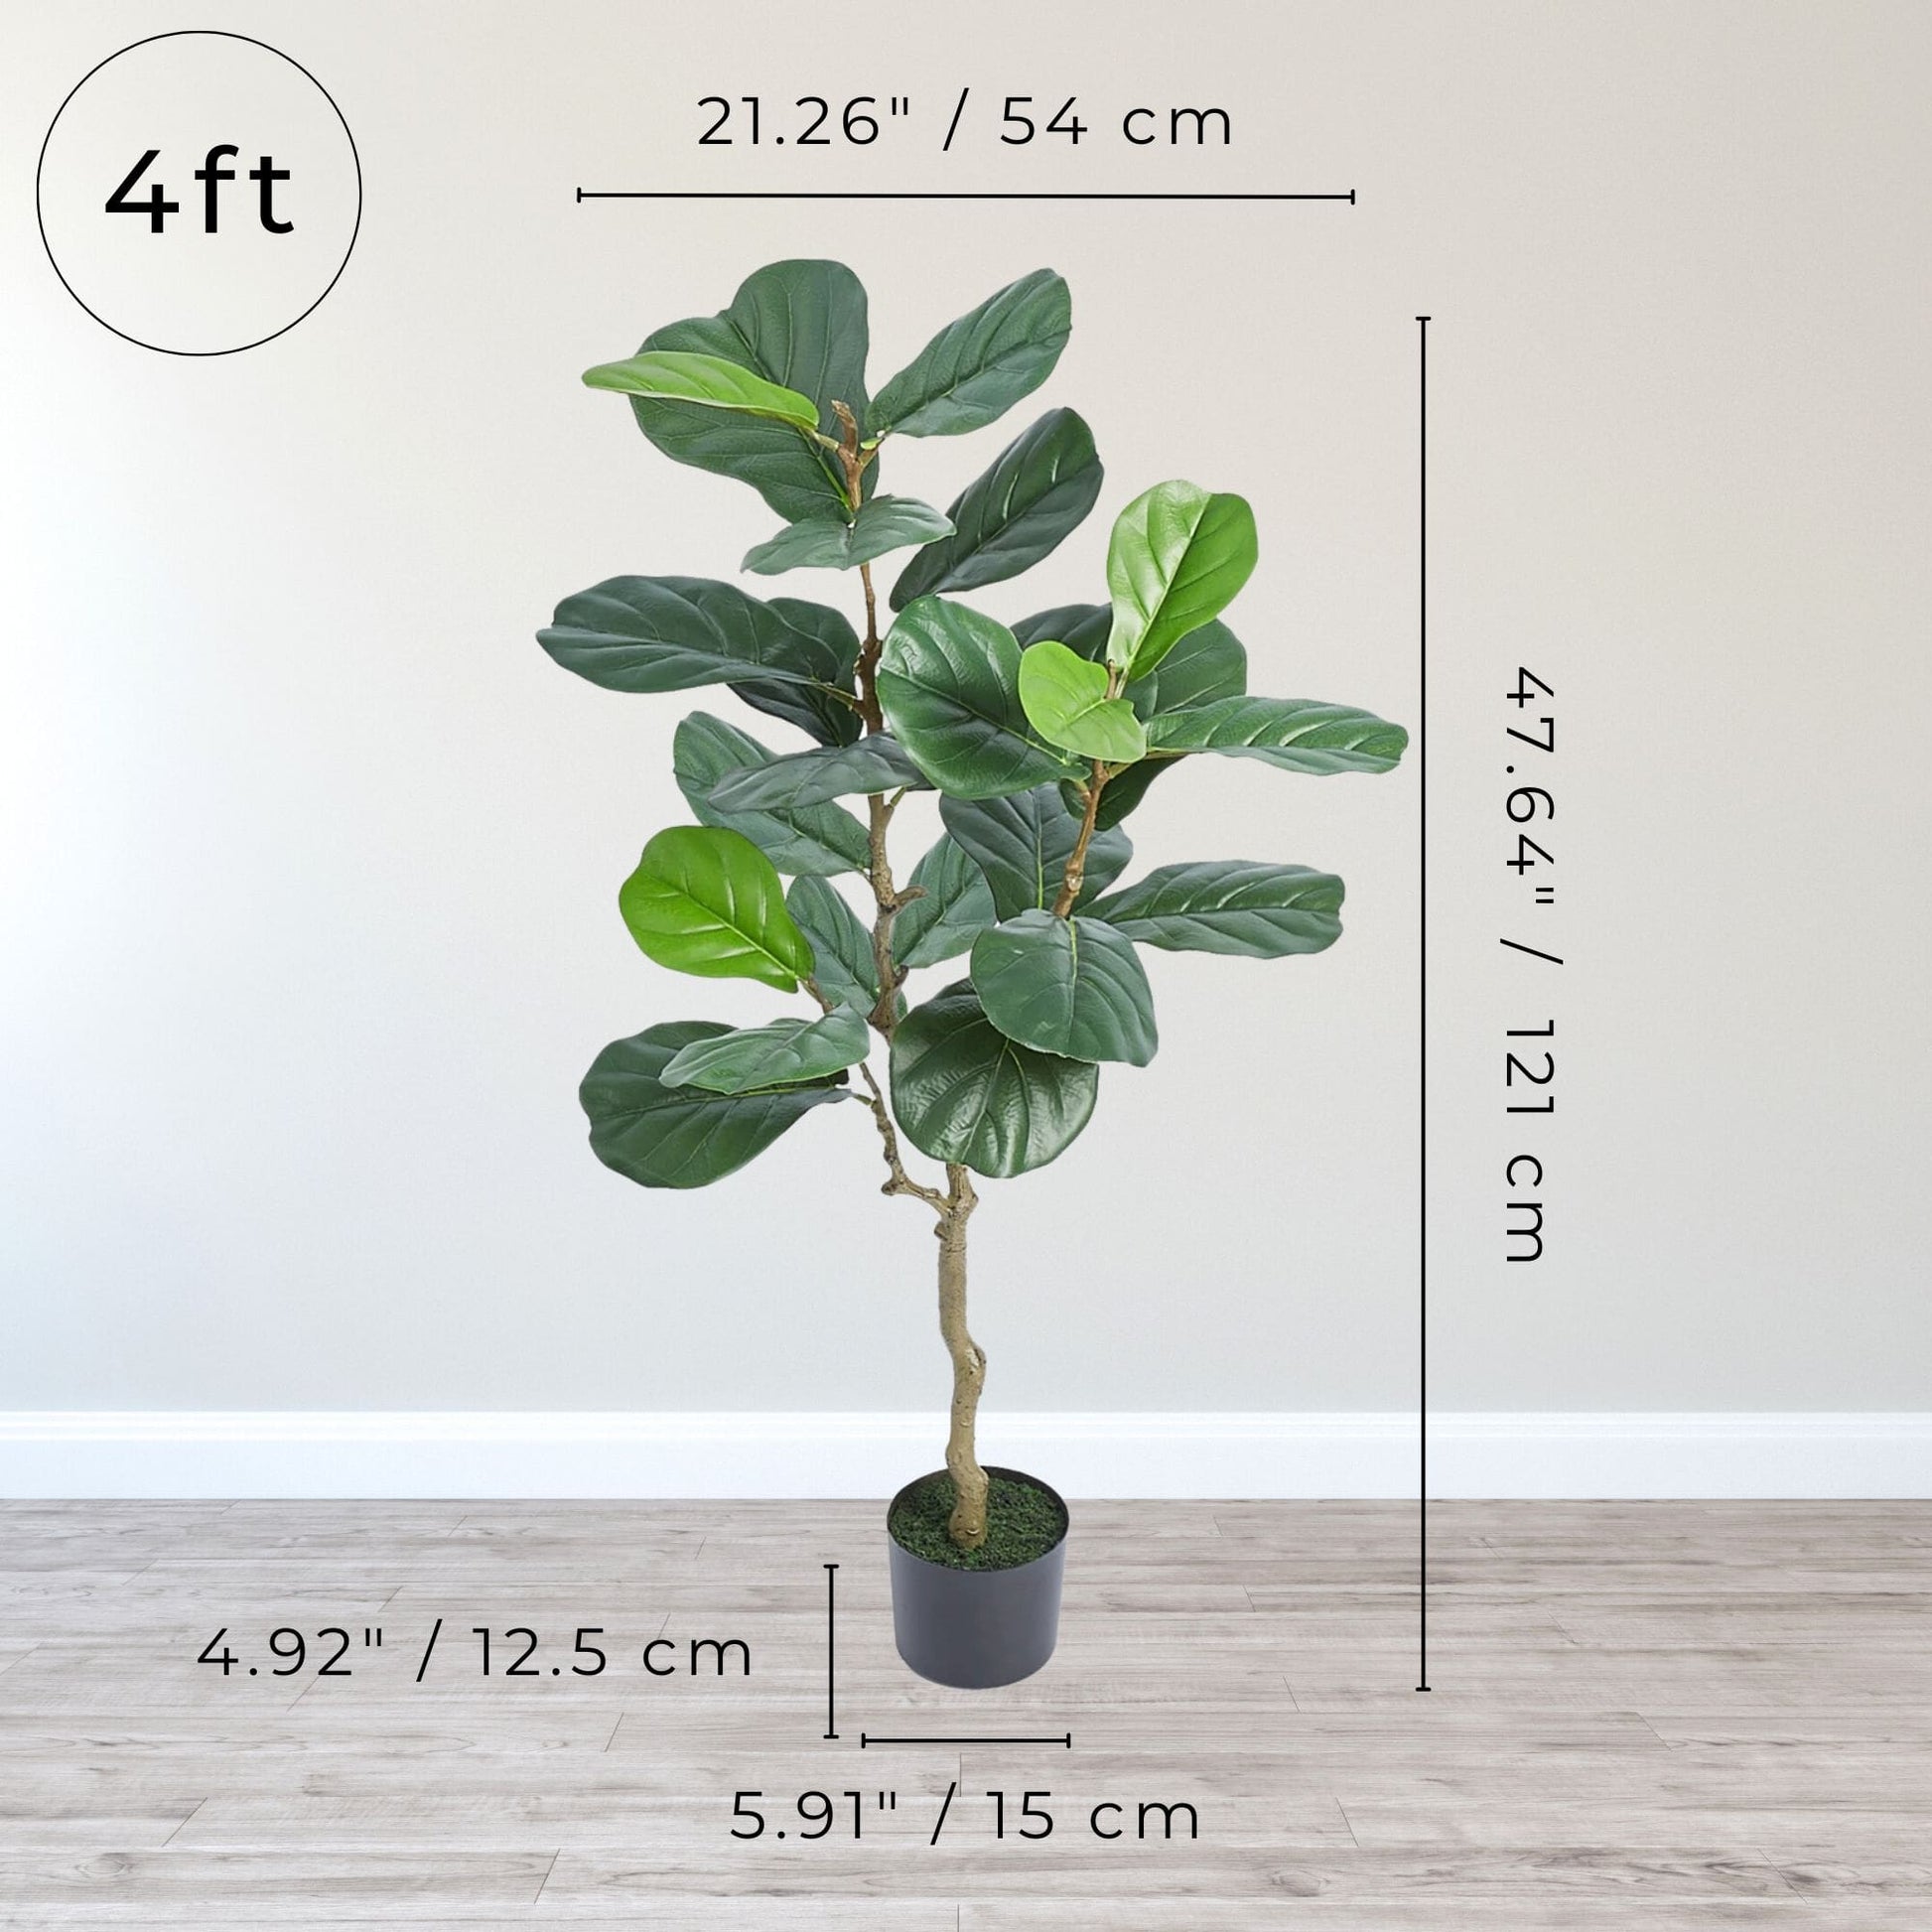 Compact 4ft artificial Ficus Lyrata tree, perfect for small spaces and modern home decor